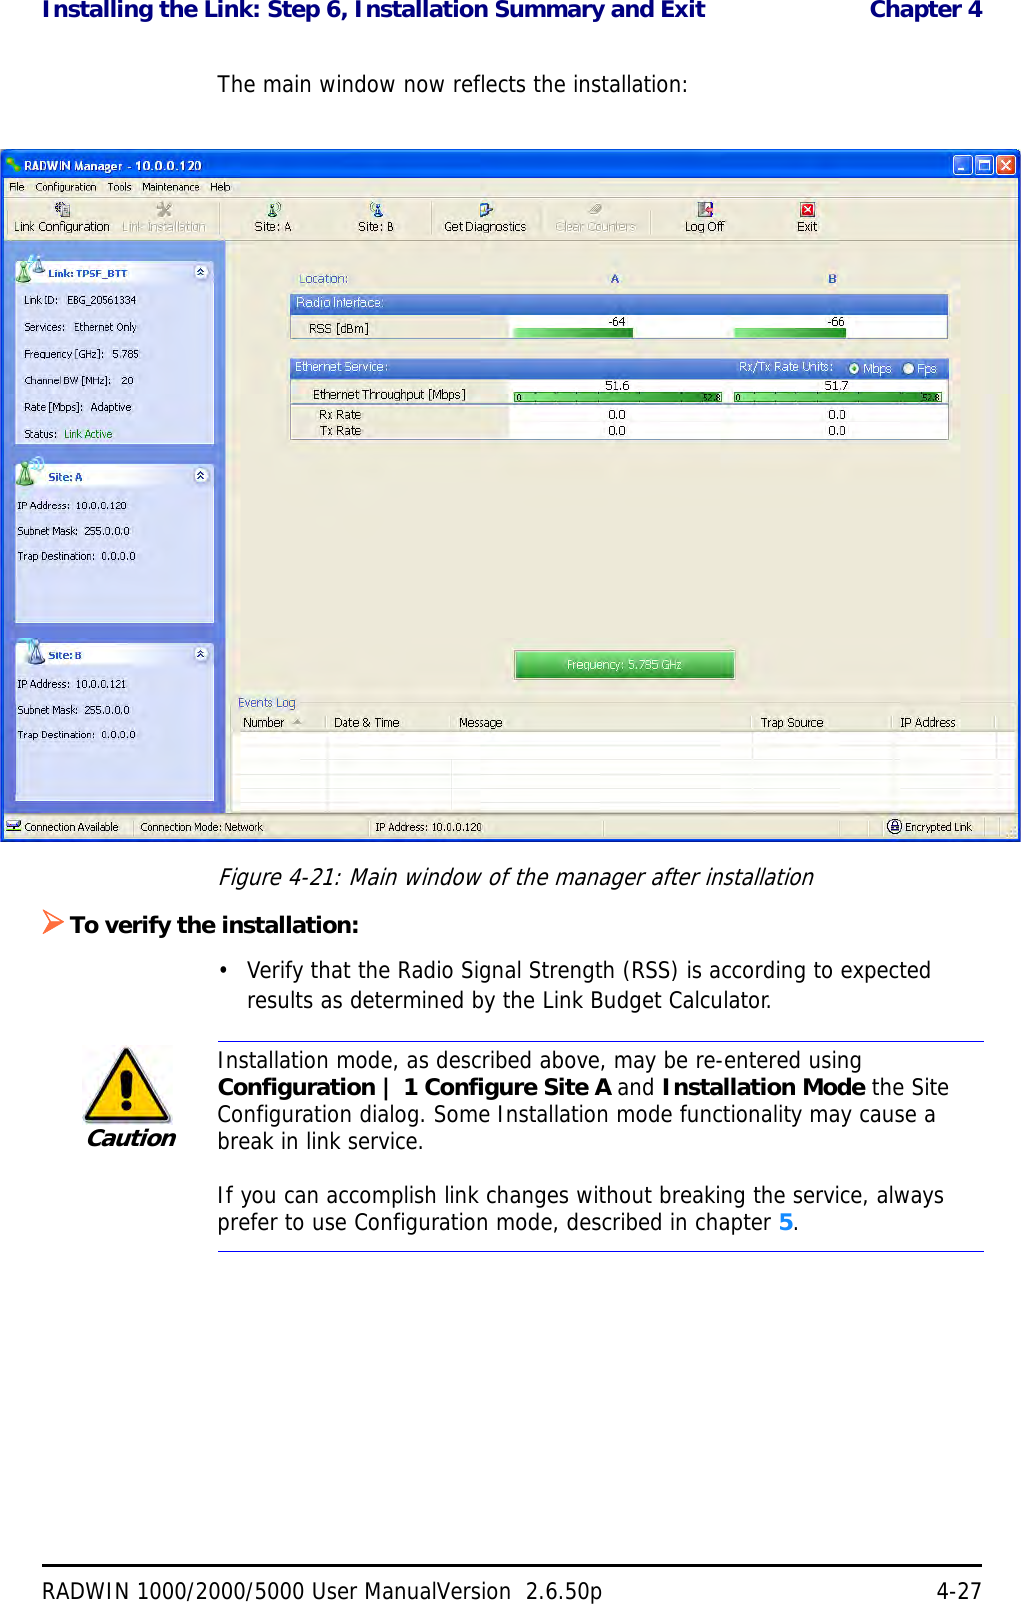 Installing the Link: Step 6, Installation Summary and Exit  Chapter 4RADWIN 1000/2000/5000 User ManualVersion  2.6.50p 4-27The main window now reflects the installation:Figure 4-21: Main window of the manager after installation To verify the installation:• Verify that the Radio Signal Strength (RSS) is according to expected results as determined by the Link Budget Calculator.CautionInstallation mode, as described above, may be re-entered using Configuration | 1 Configure Site A and Installation Mode the Site Configuration dialog. Some Installation mode functionality may cause a break in link service.If you can accomplish link changes without breaking the service, always prefer to use Configuration mode, described in chapter 5. 